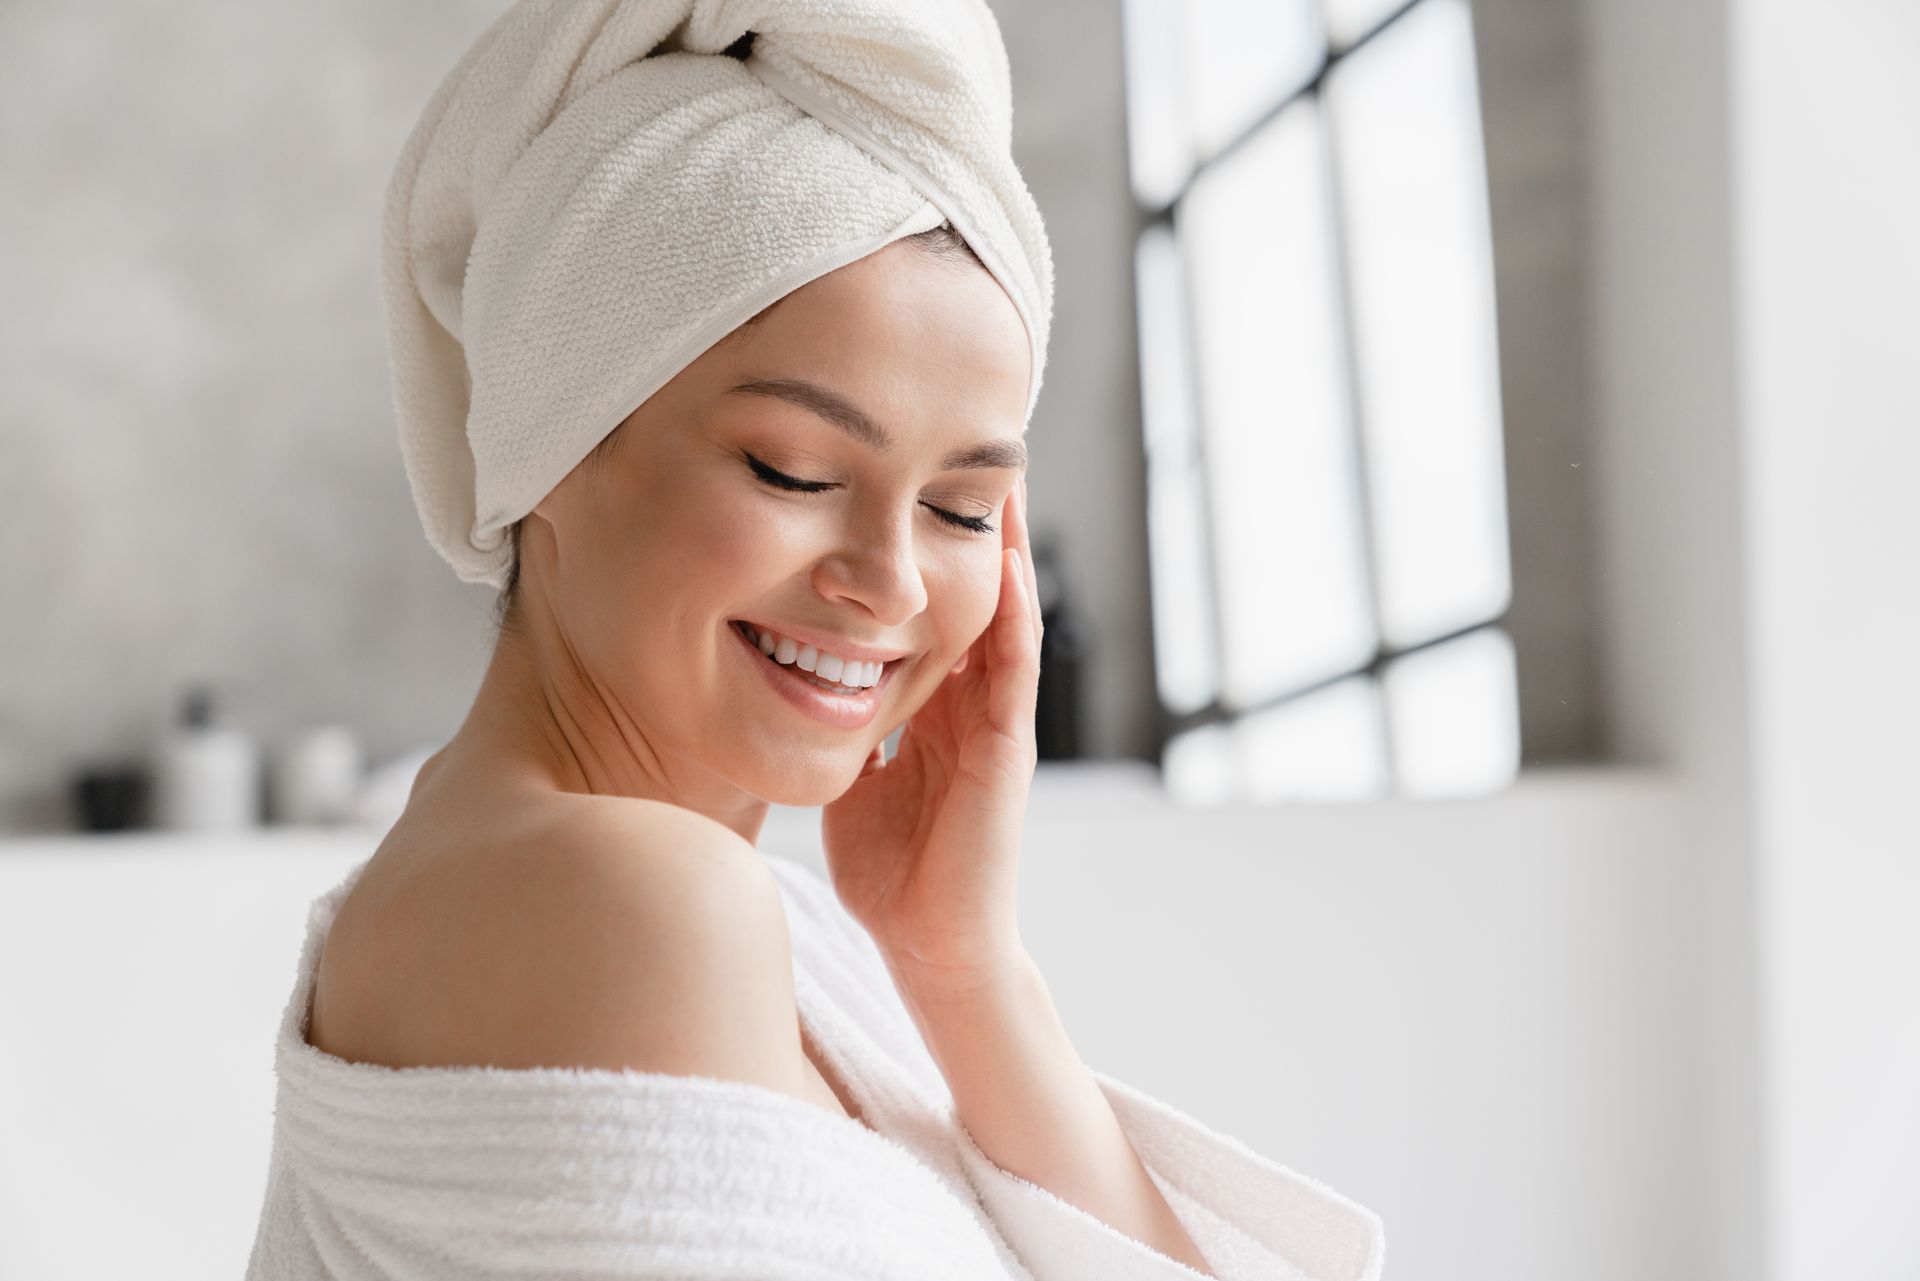 A woman with a towel wrapped around her head is smiling in a bathroom.